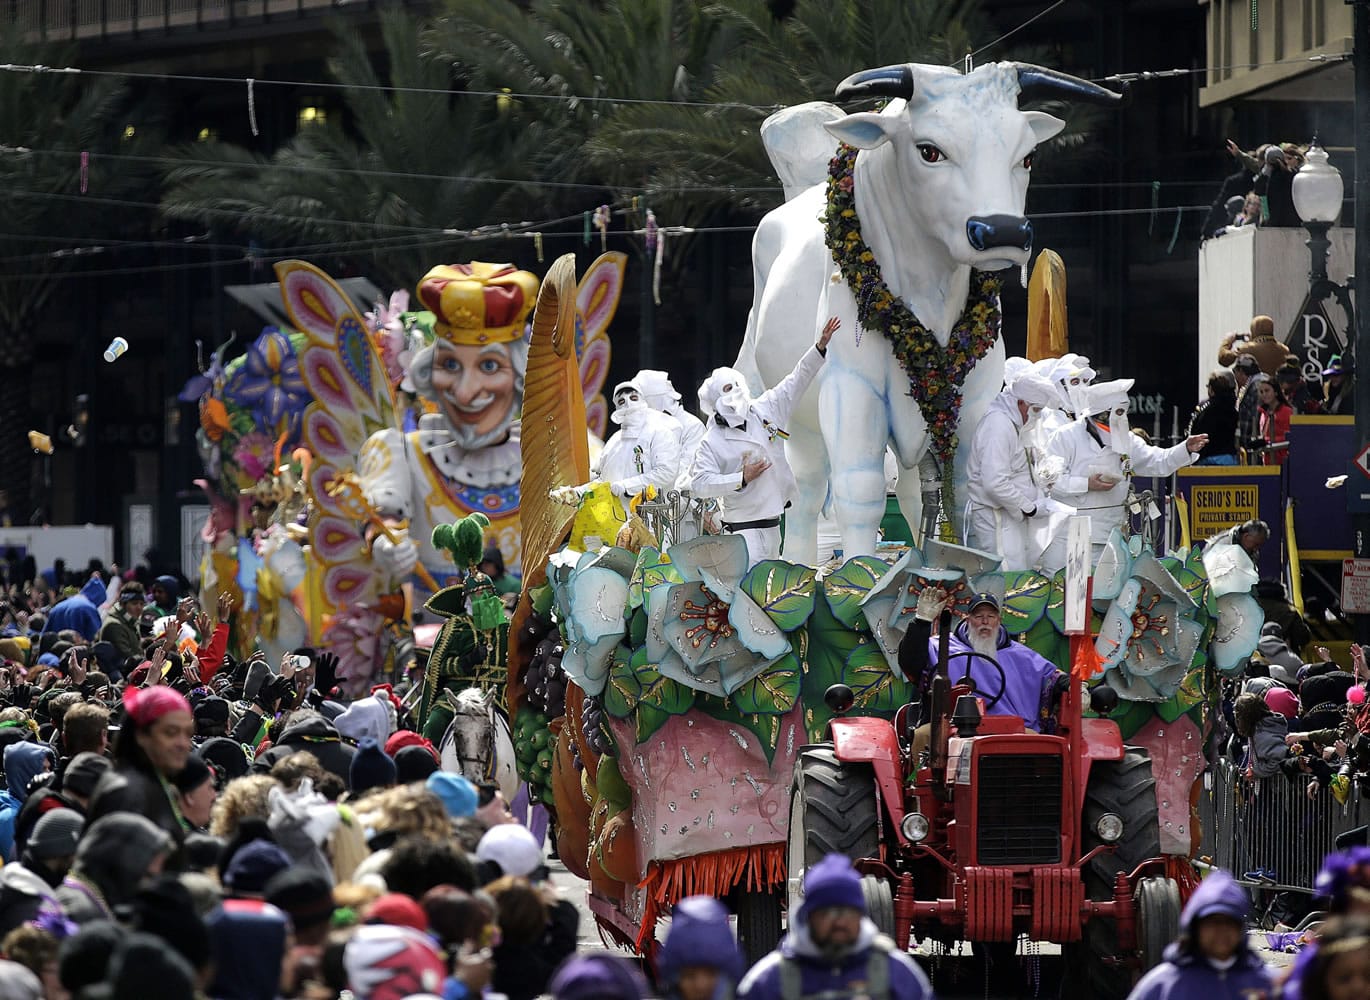 The Krewe of Rex parade rolls through downtown New Orleans last year on Mardi Gras in New Orleans. Mardi Gras this year falls on Feb. 9.